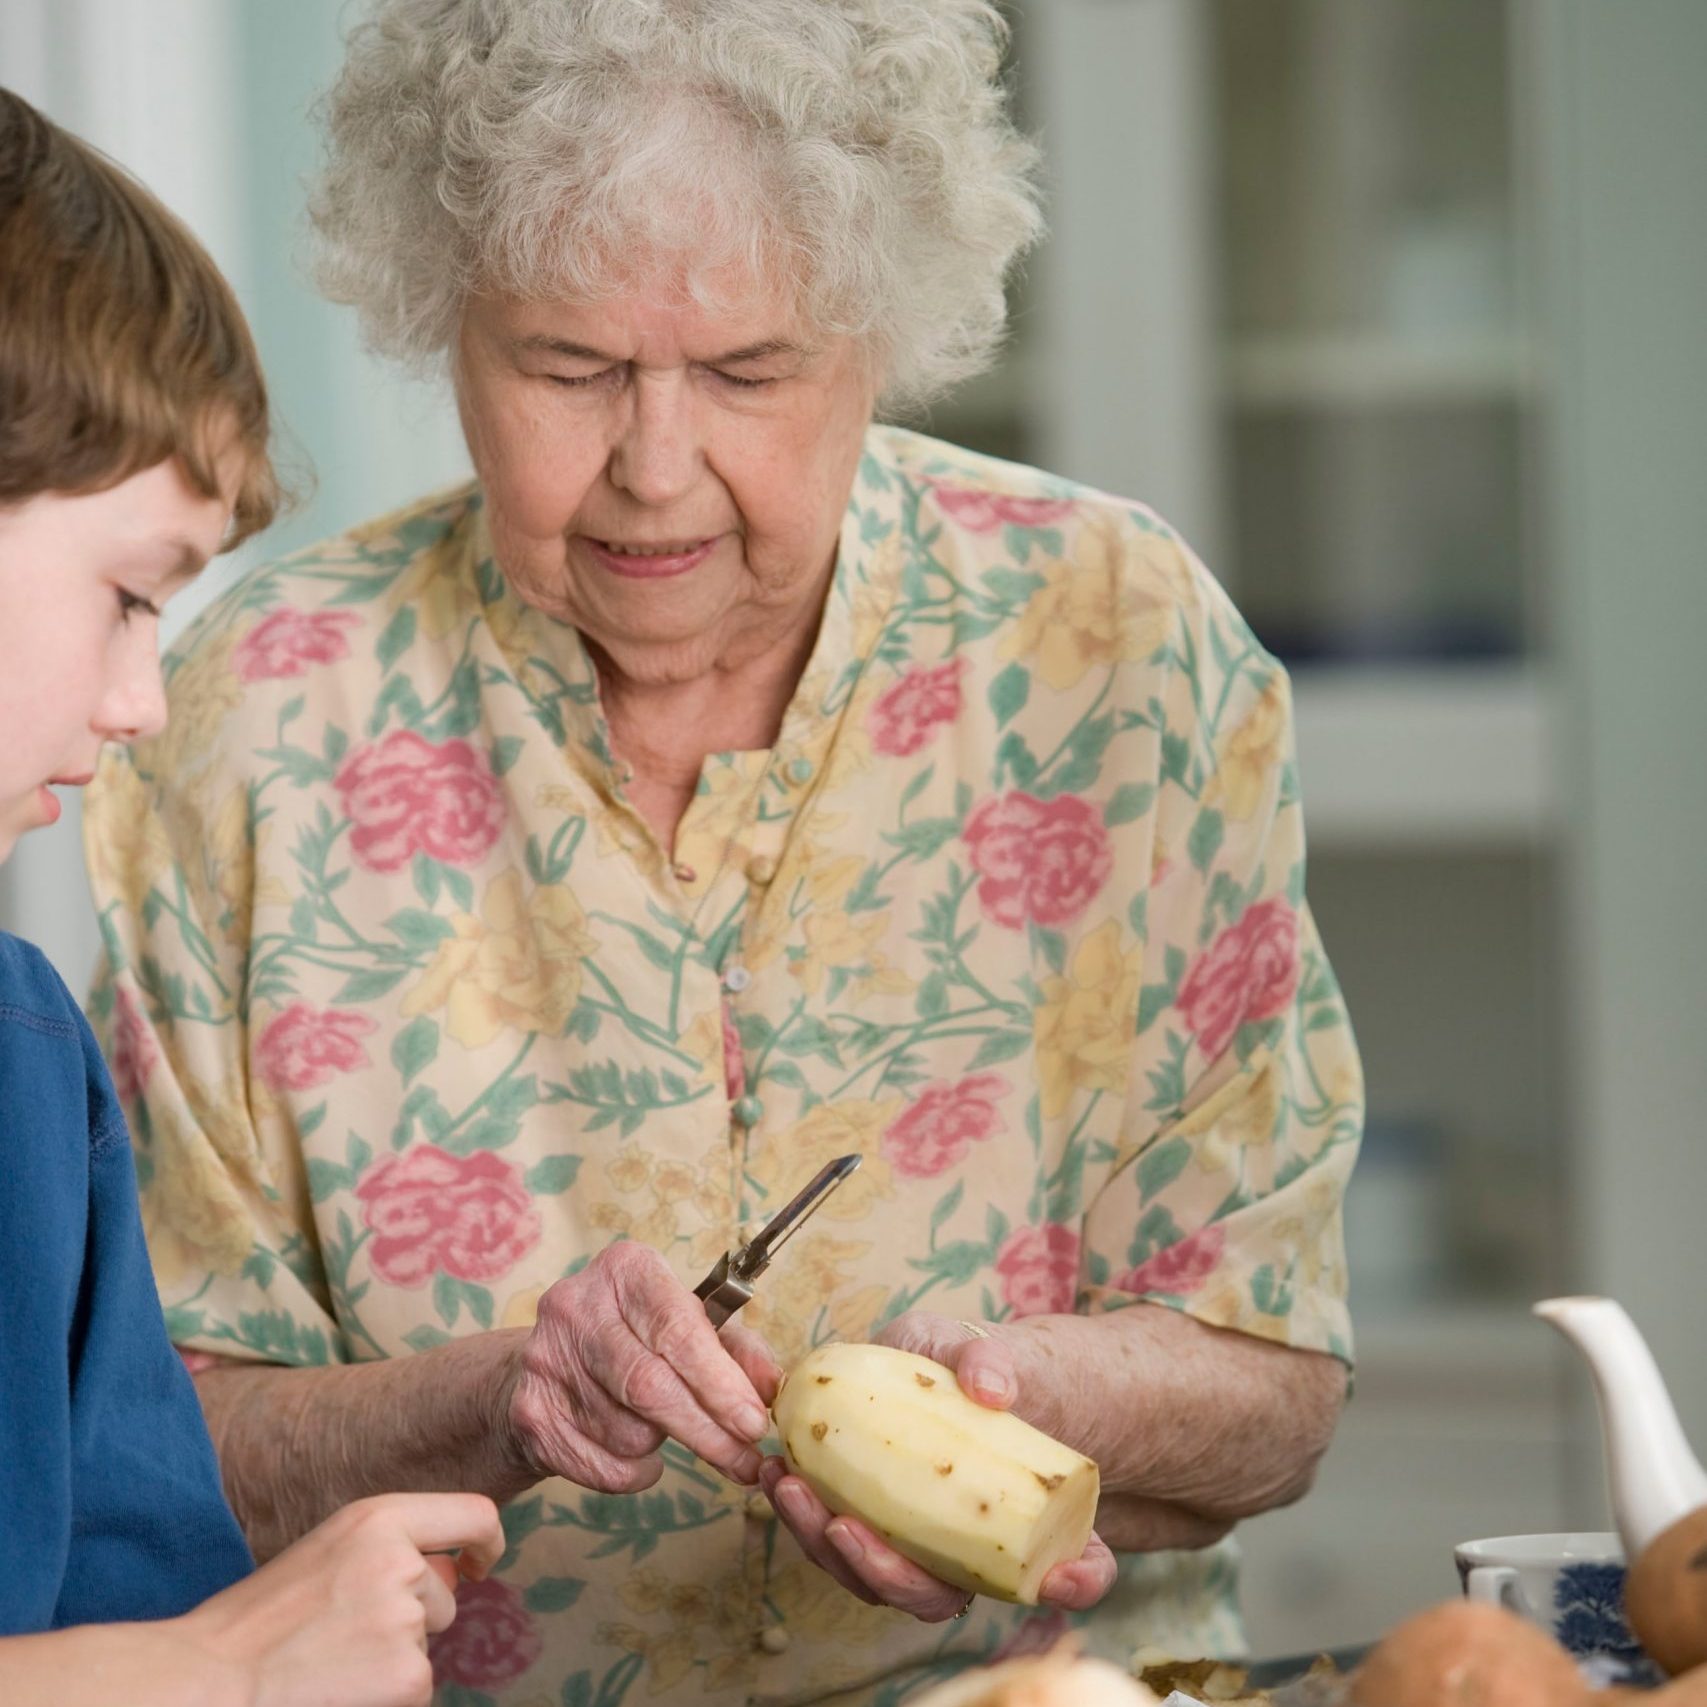 Old woman peeling potatoes with a young boy.